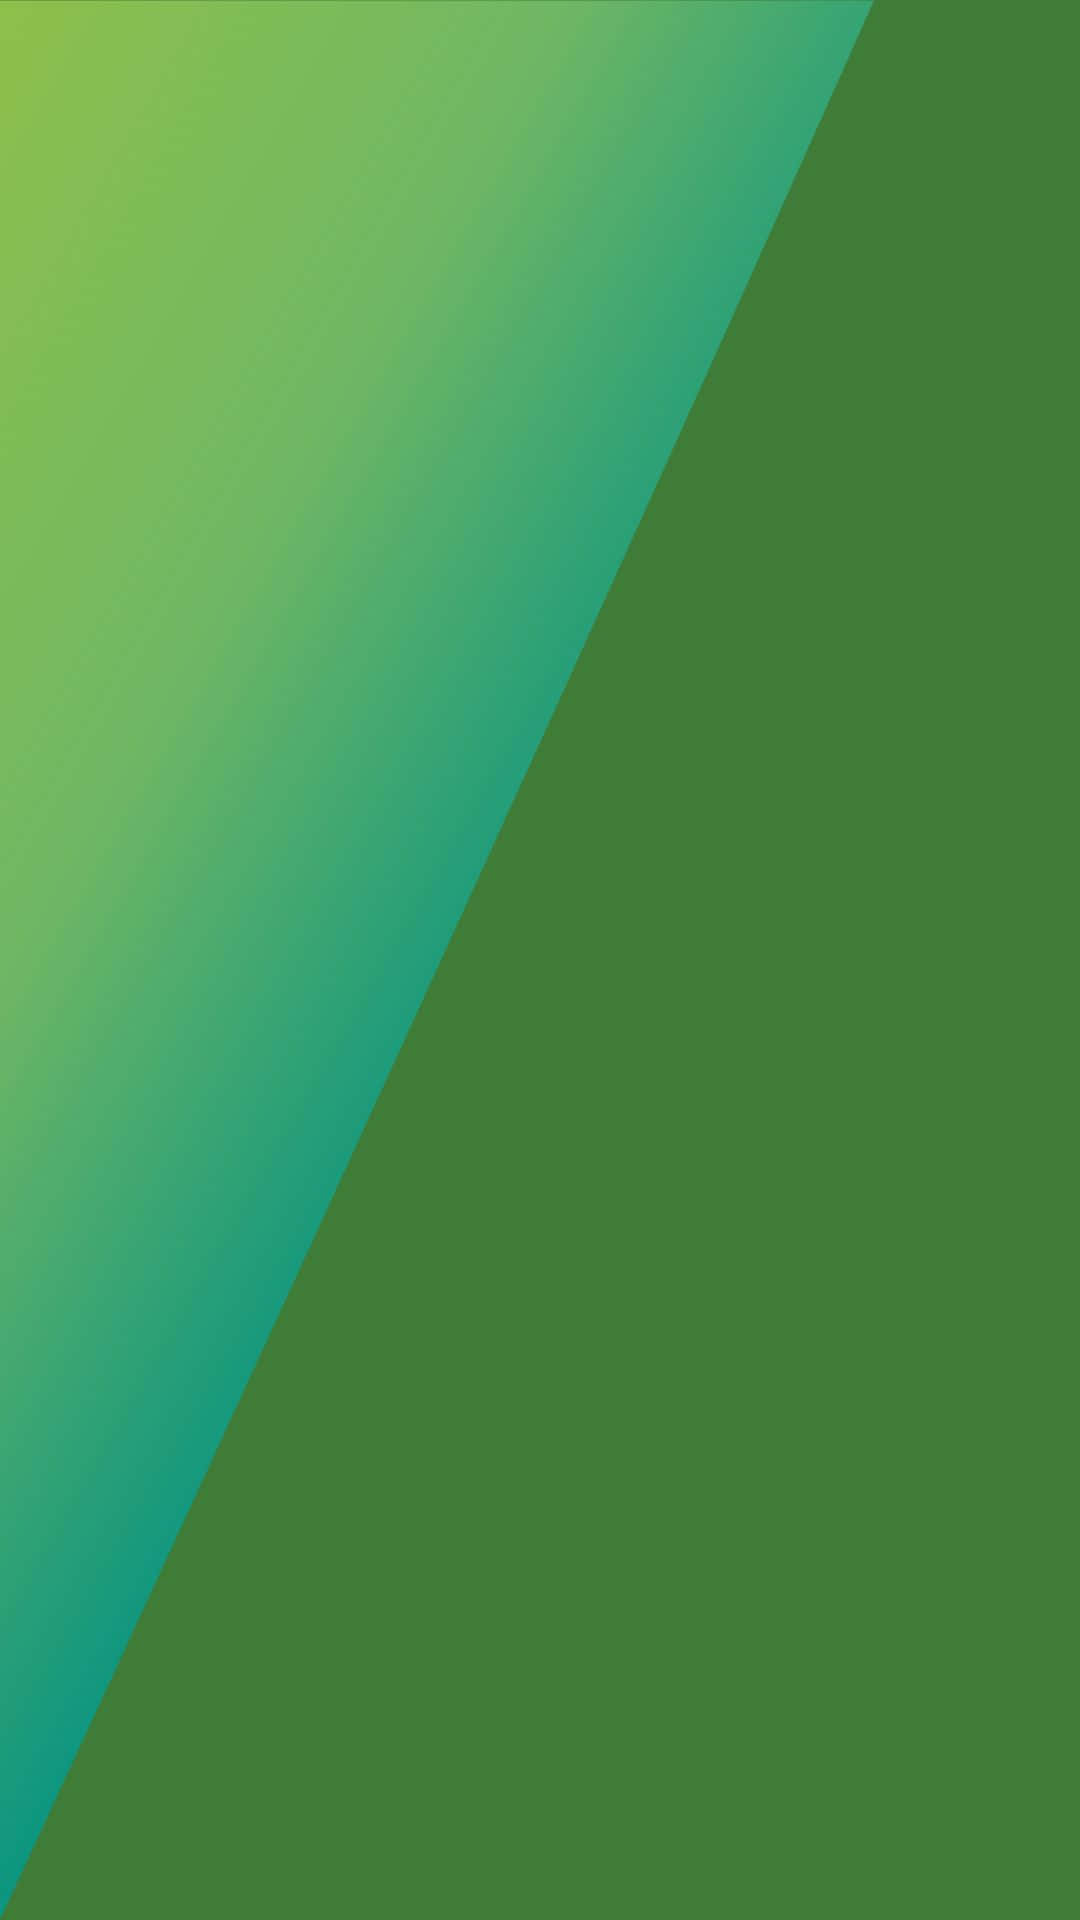 A Green And Blue Background With A Triangle